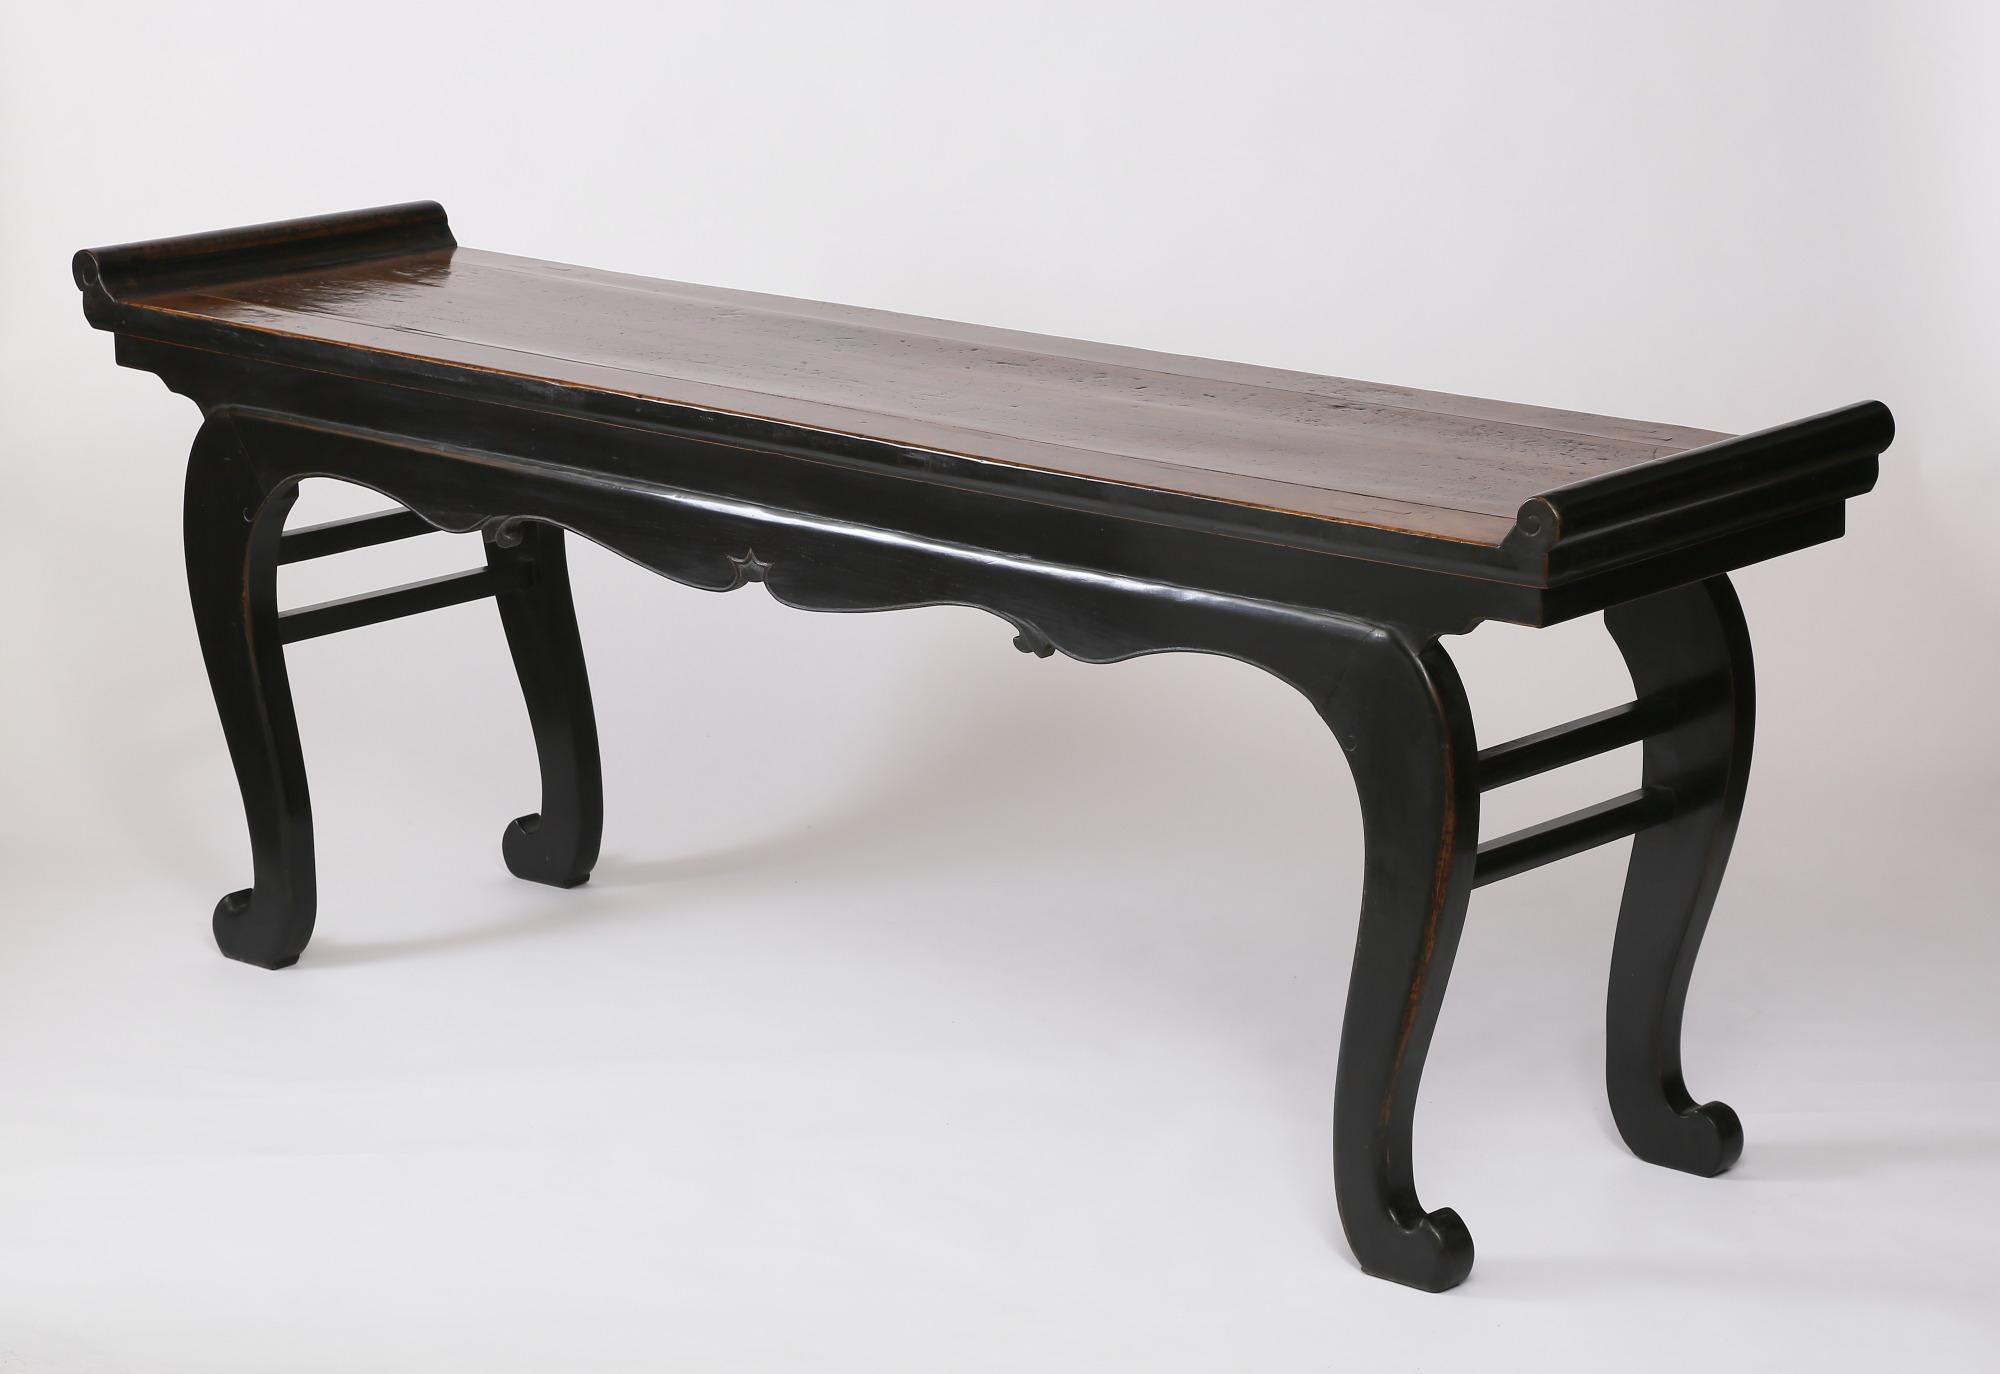 The altar table with everted flanges covered in rich black lacquer, the lacquer on the top worn out, exposing the beautiful grain, the top above cusped curvilinear foliage aprons carved with a beading, supported on cabriole legs, reinforced by